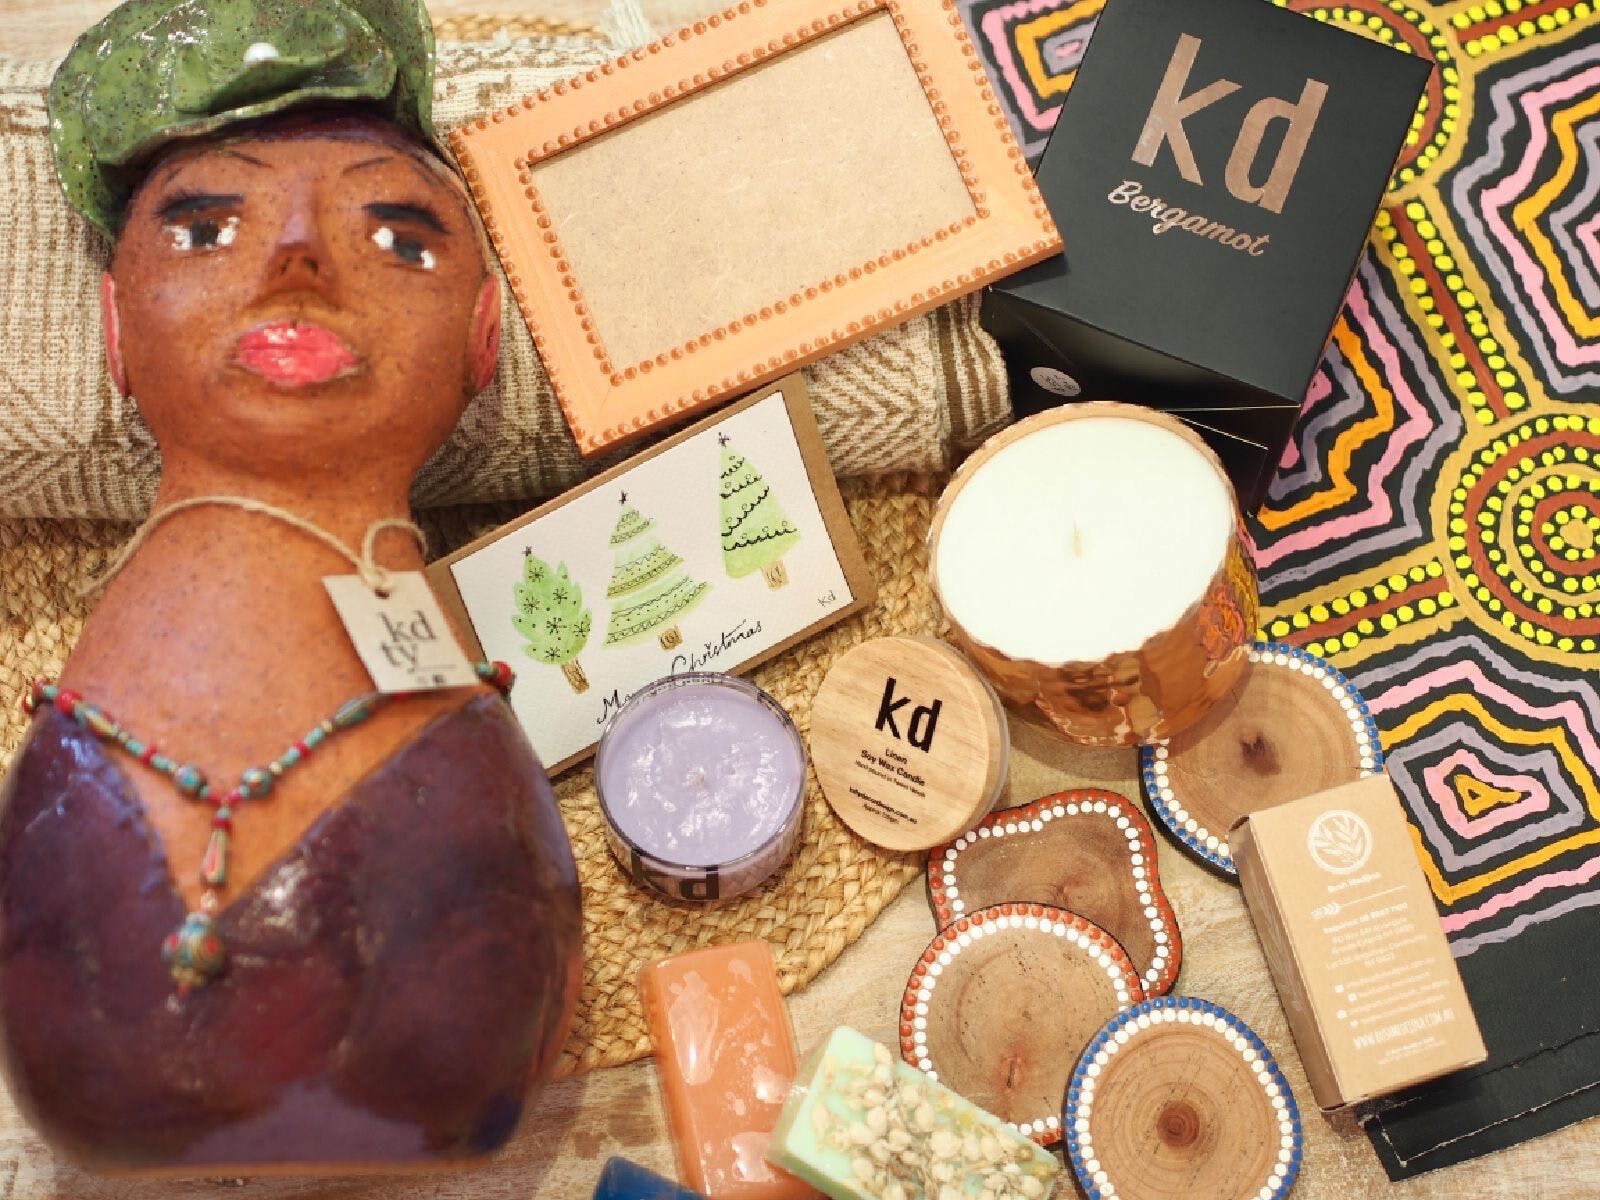 Handmade Candles, Pottery, soaps, Aboriginal Art and more at KDTY Decor Design, Tweed Heads